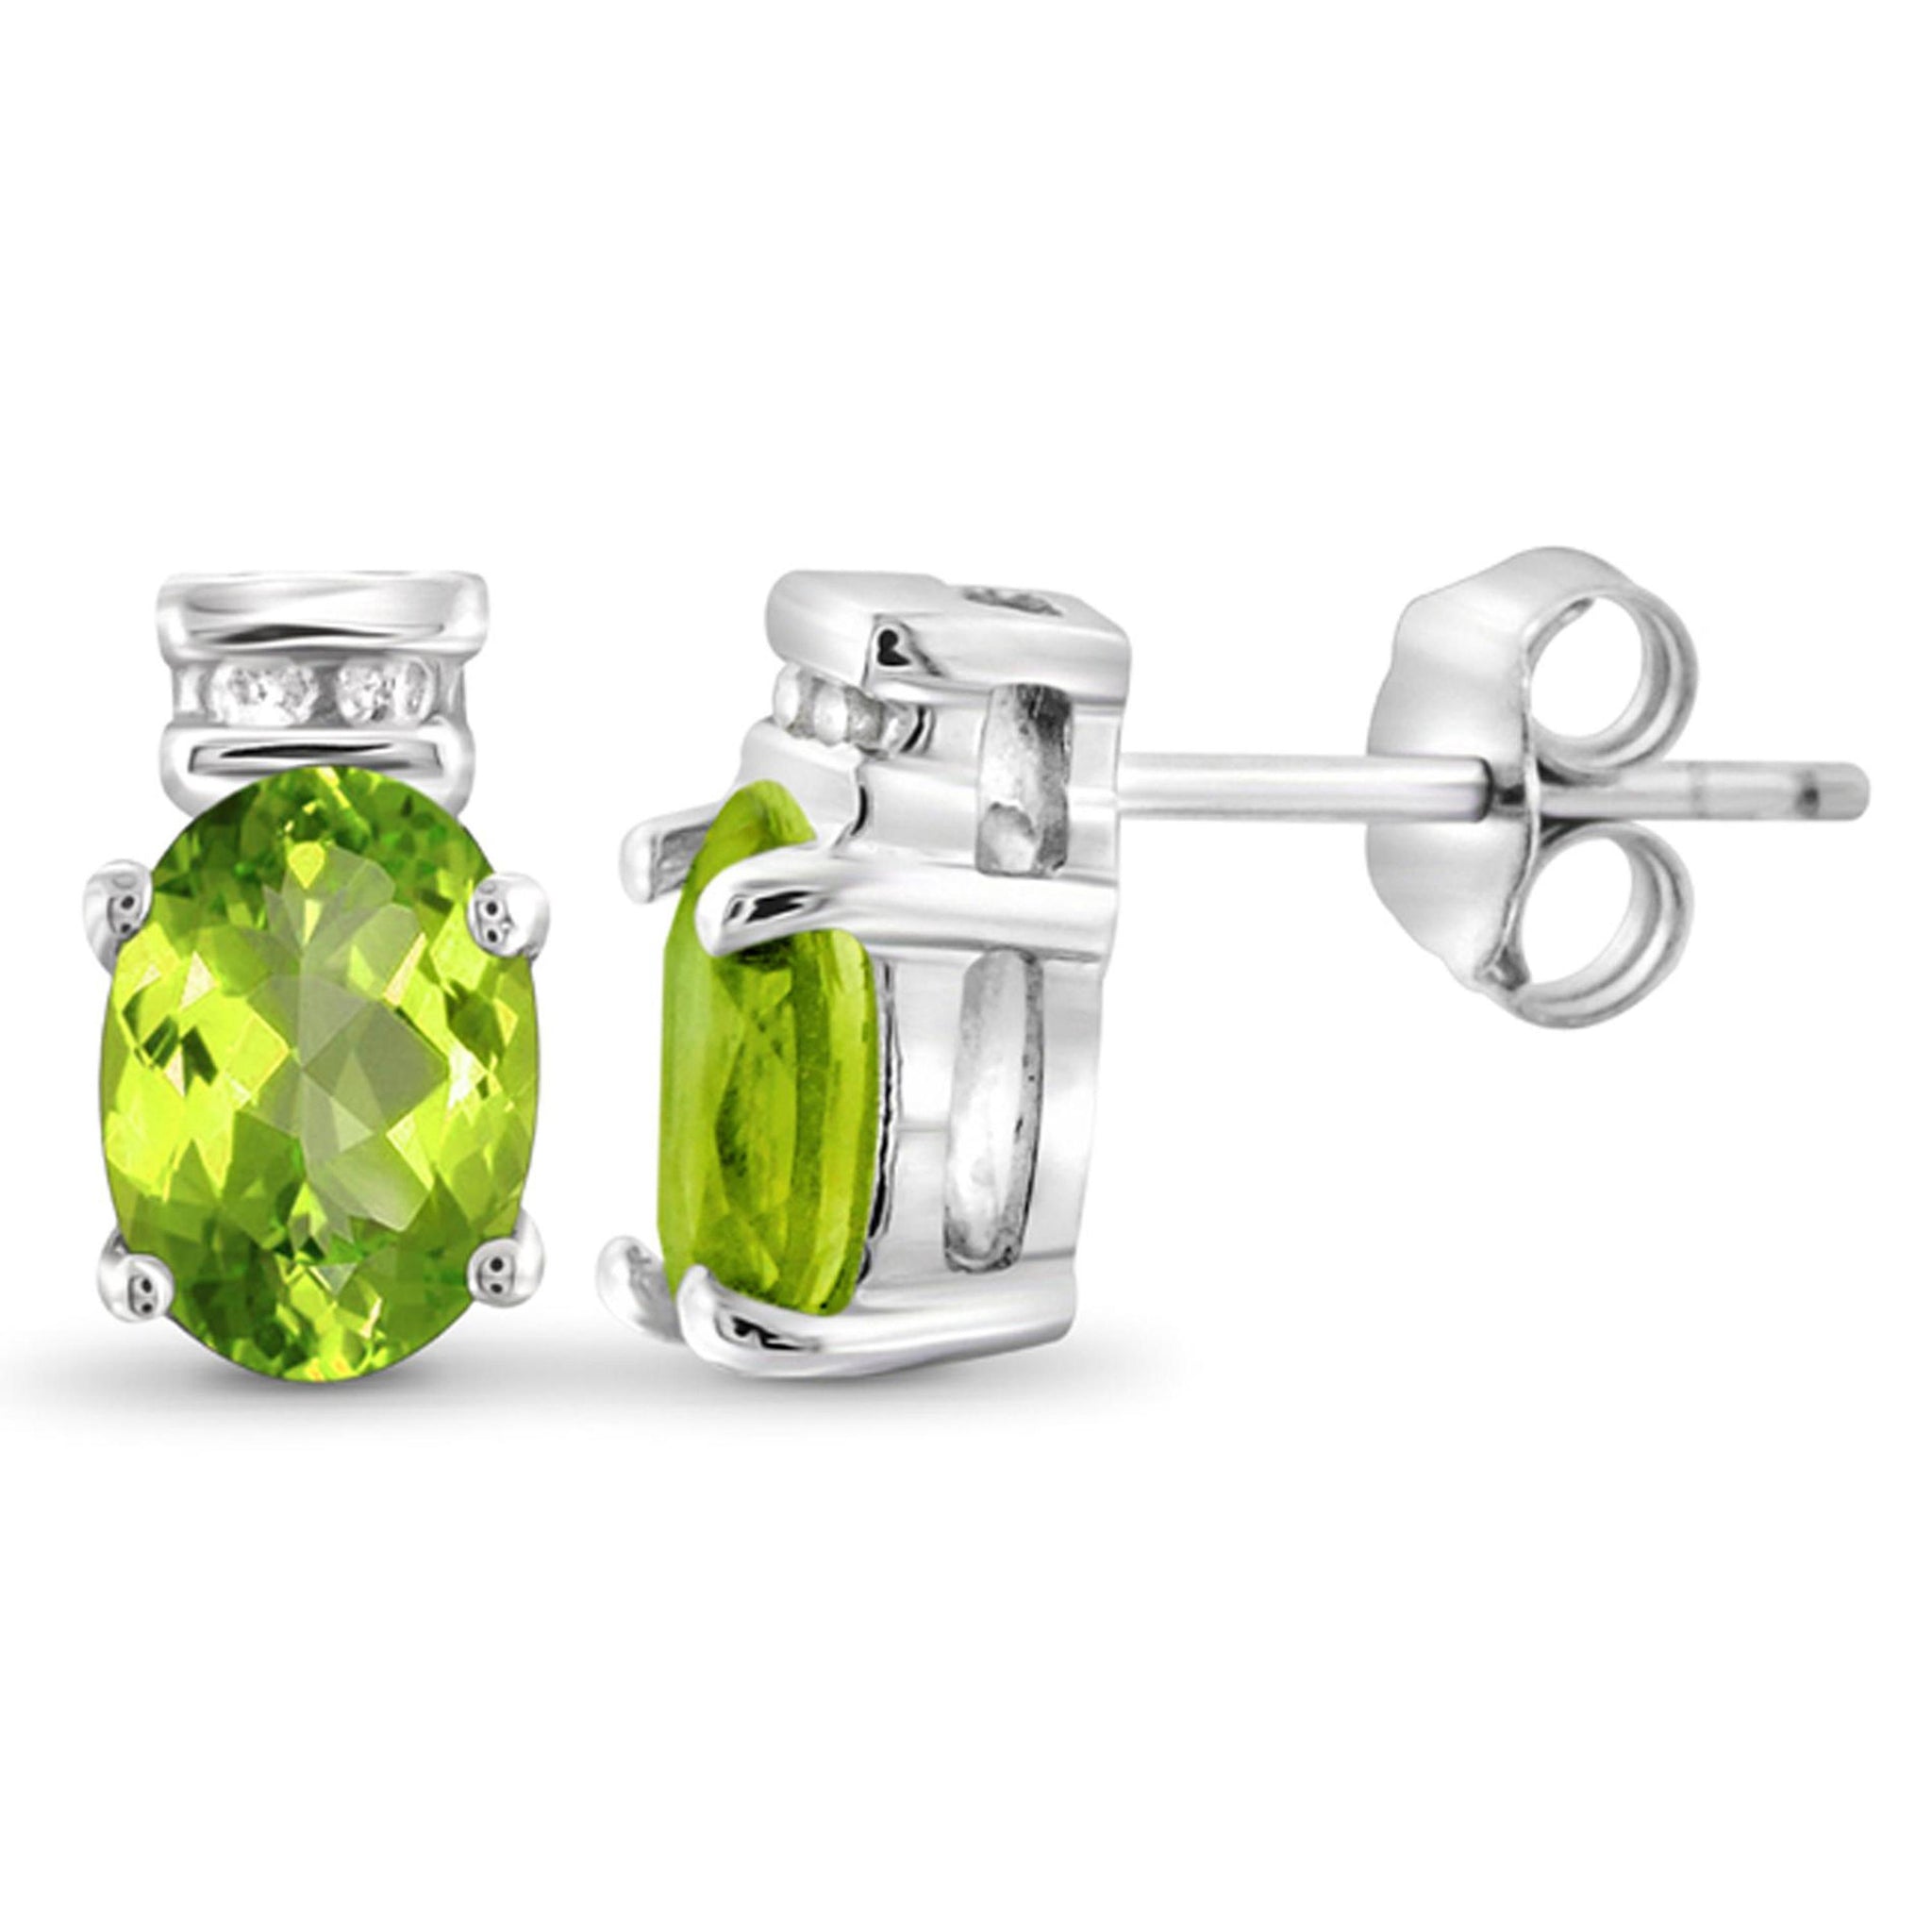 JewelonFire 1.00 Carat T.G.W. Peridot And White Diamond Accent Sterling Silver Stud Earrings - Assorted Colors